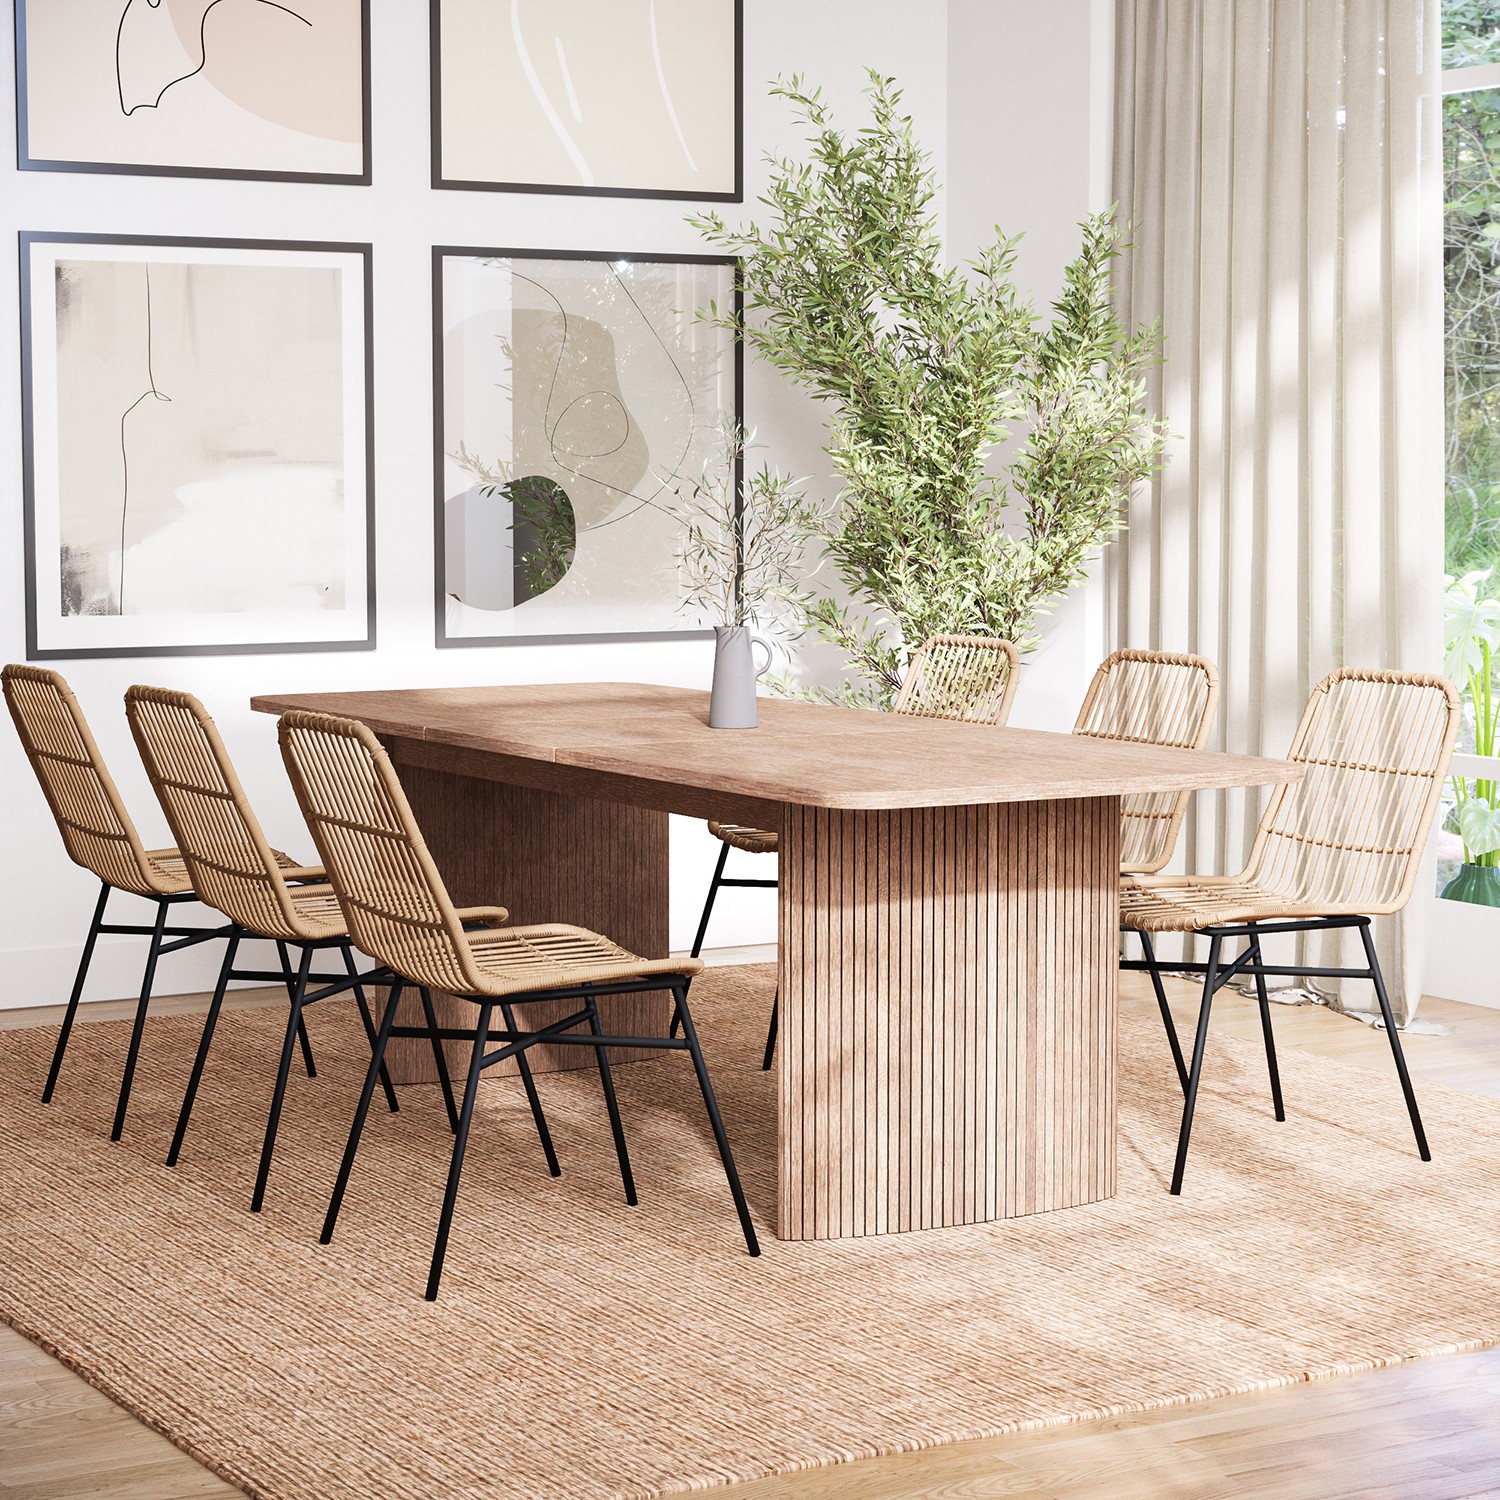 Photo of Extendable oak dining table with 6 rattan dining chairs - jarel